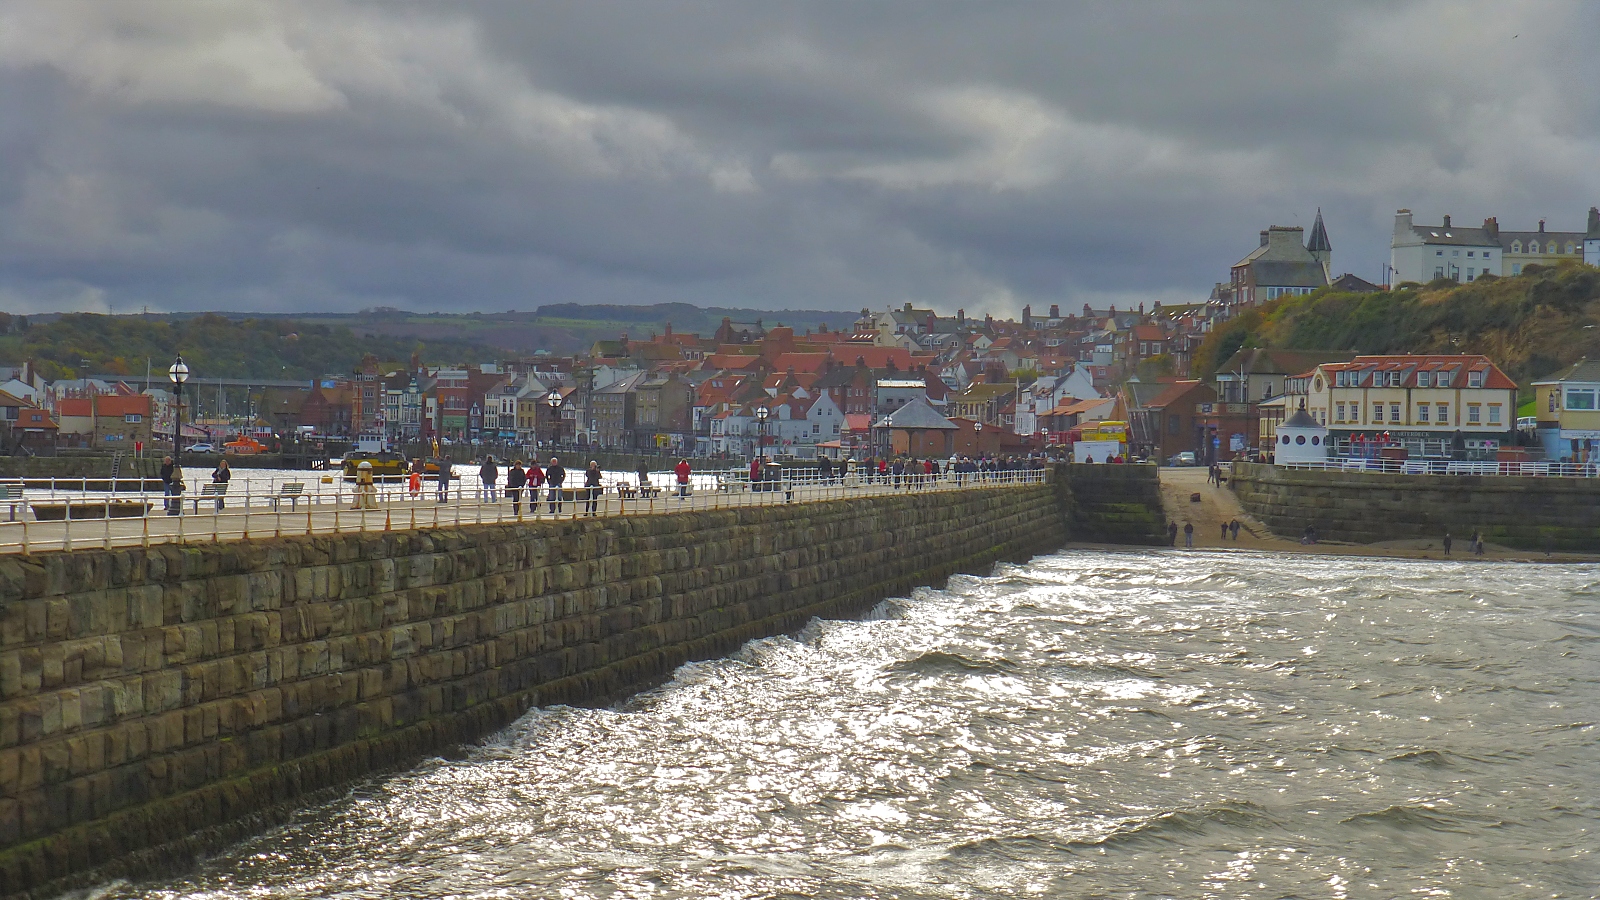 Blustery Day in Whitby